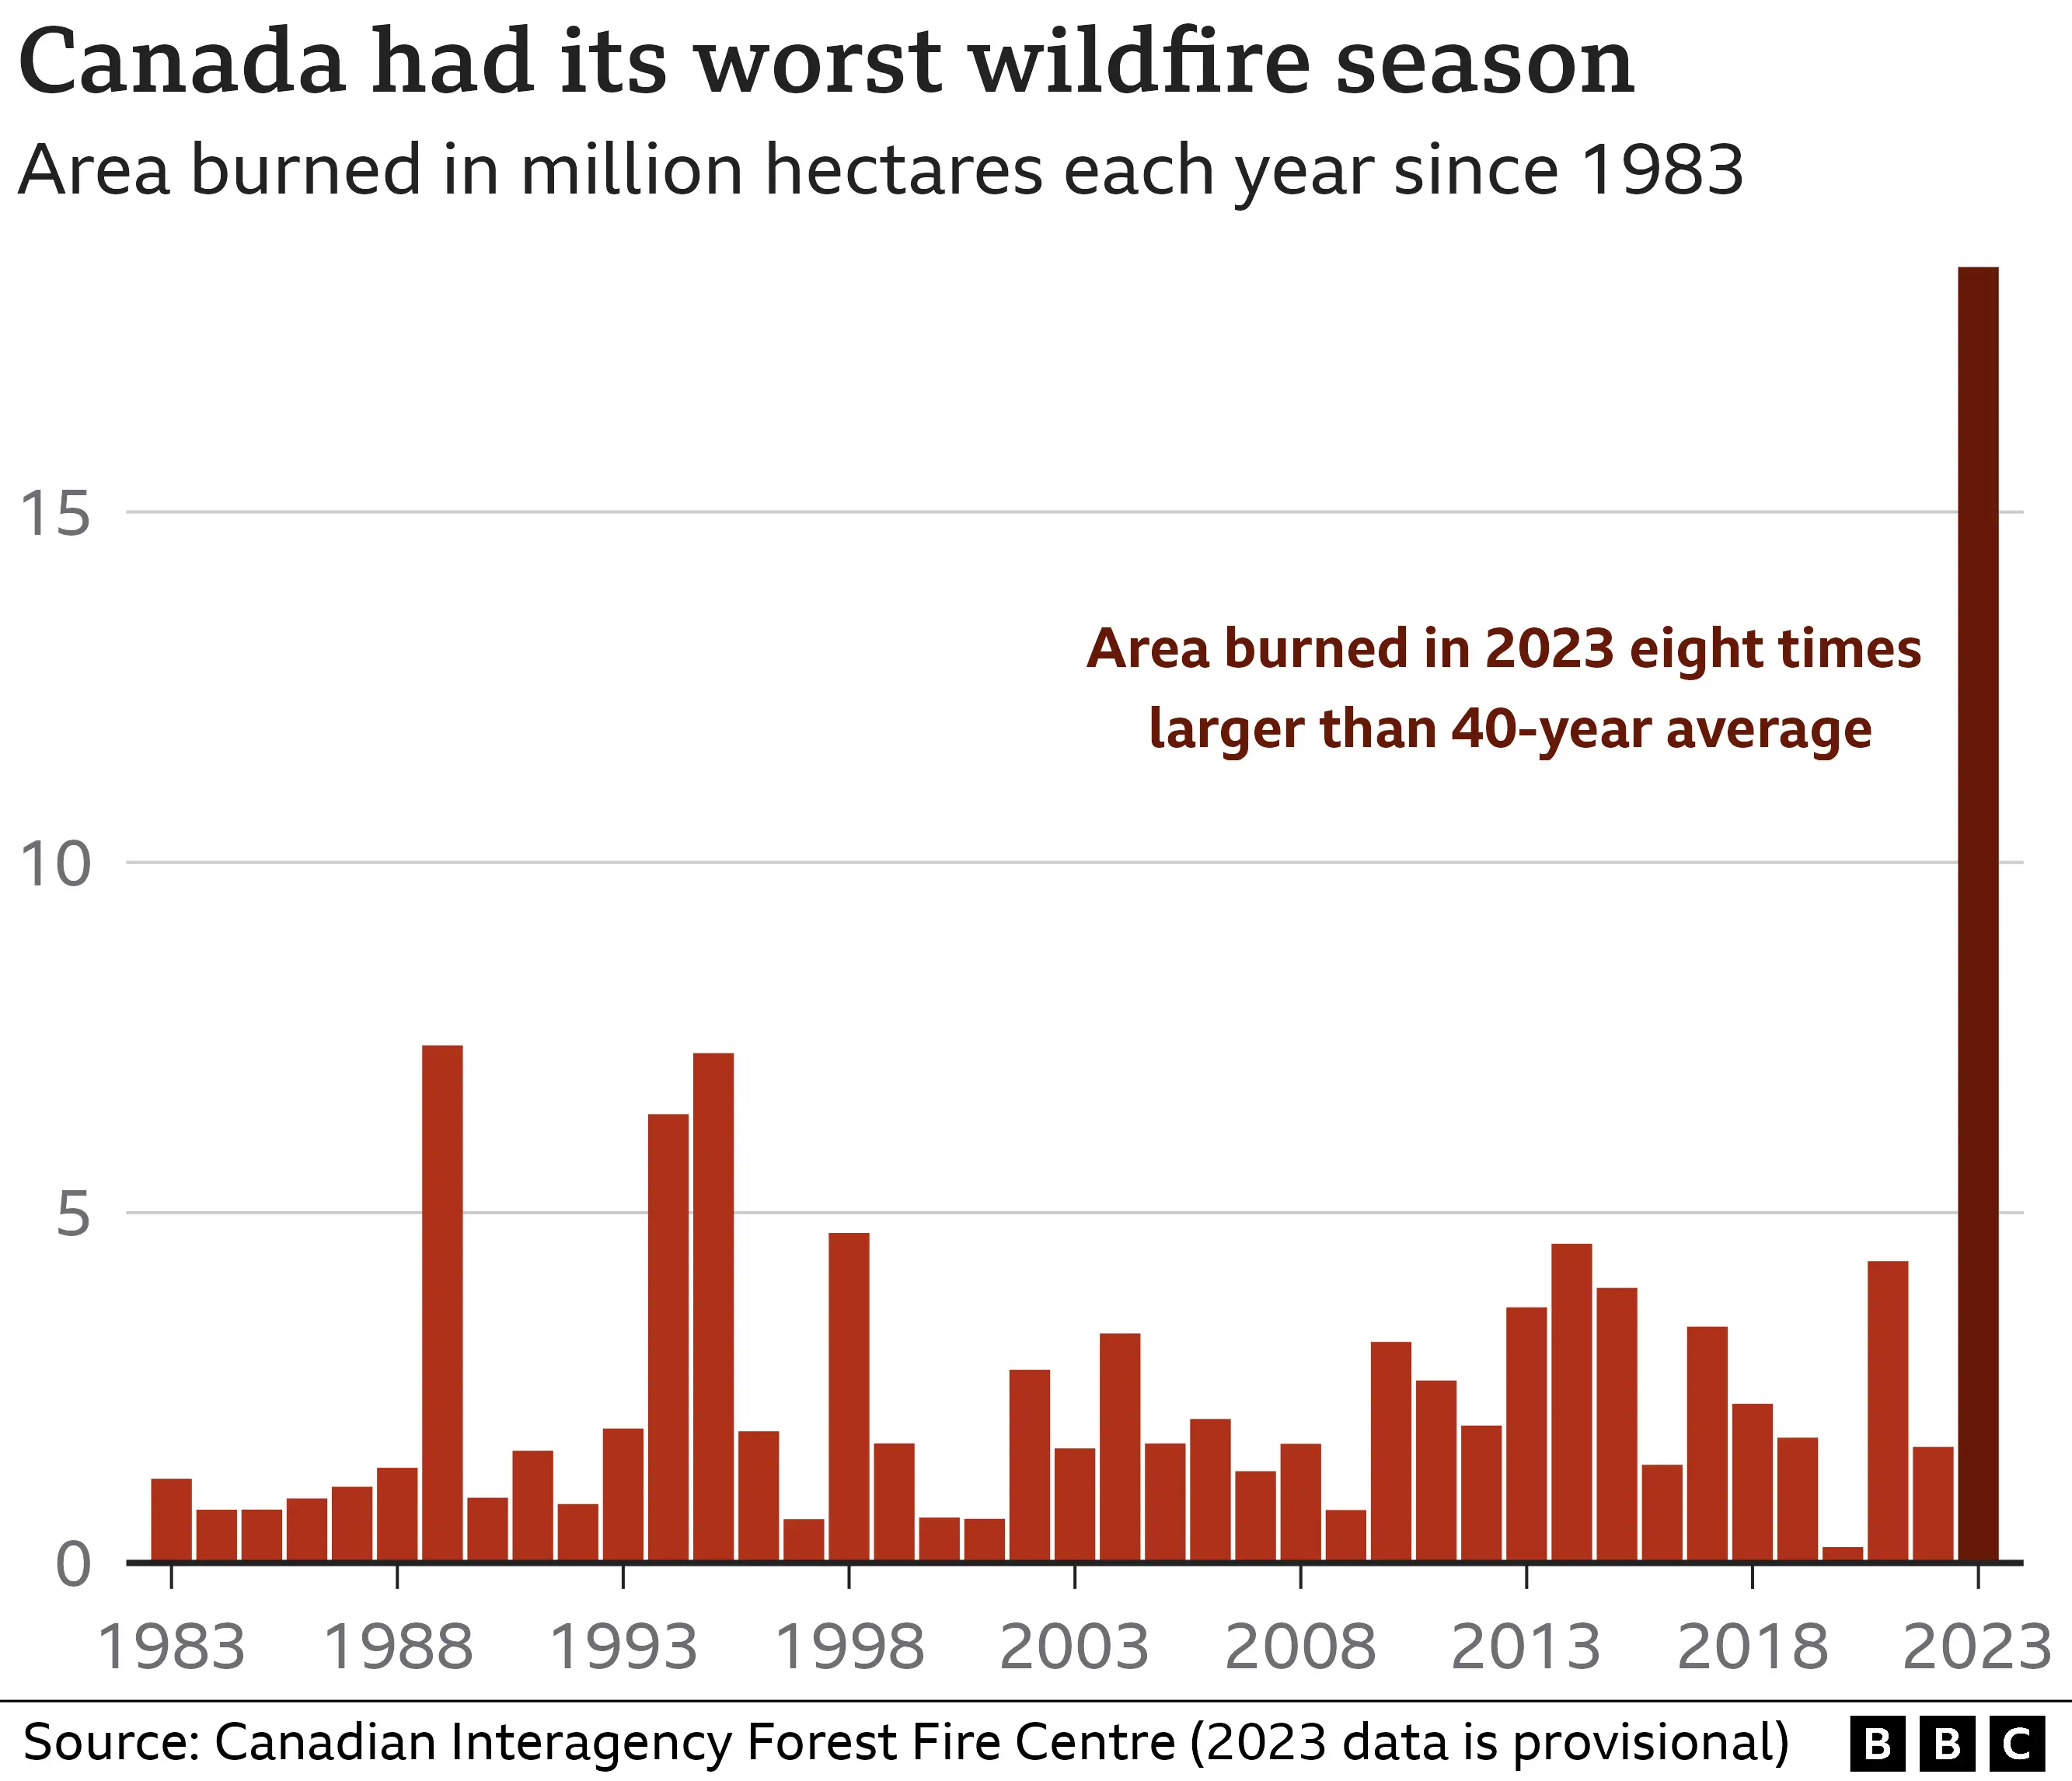 How climate change worsens heatwaves, droughts, wildfires and floods